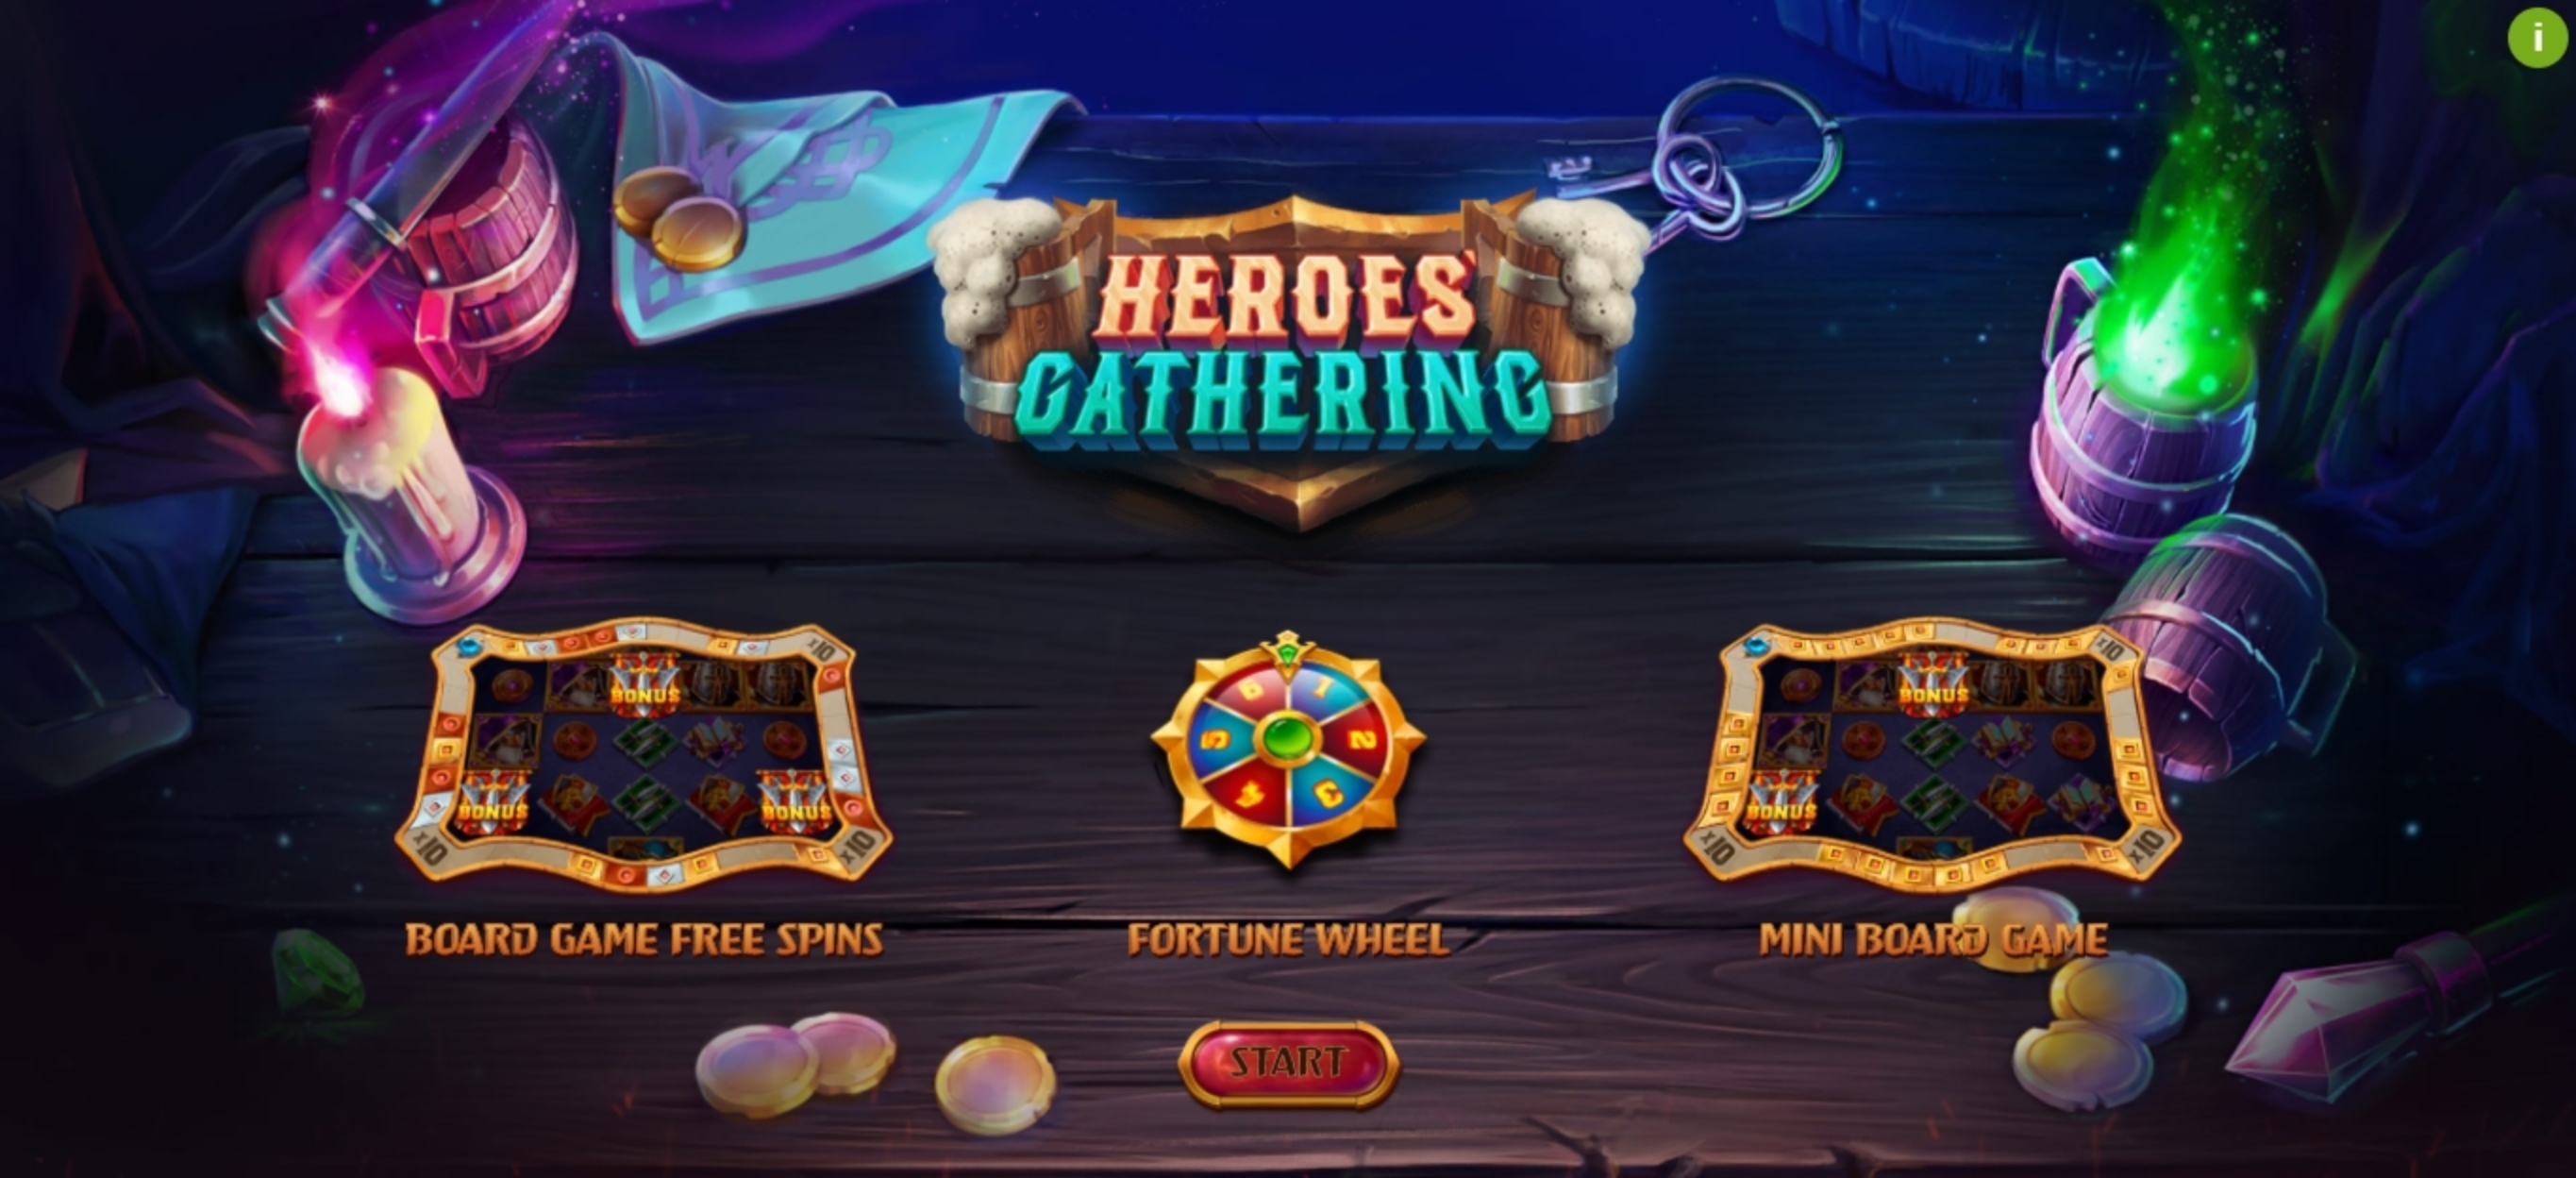 Play Heroes Gathering Free Casino Slot Game by Relax Gaming